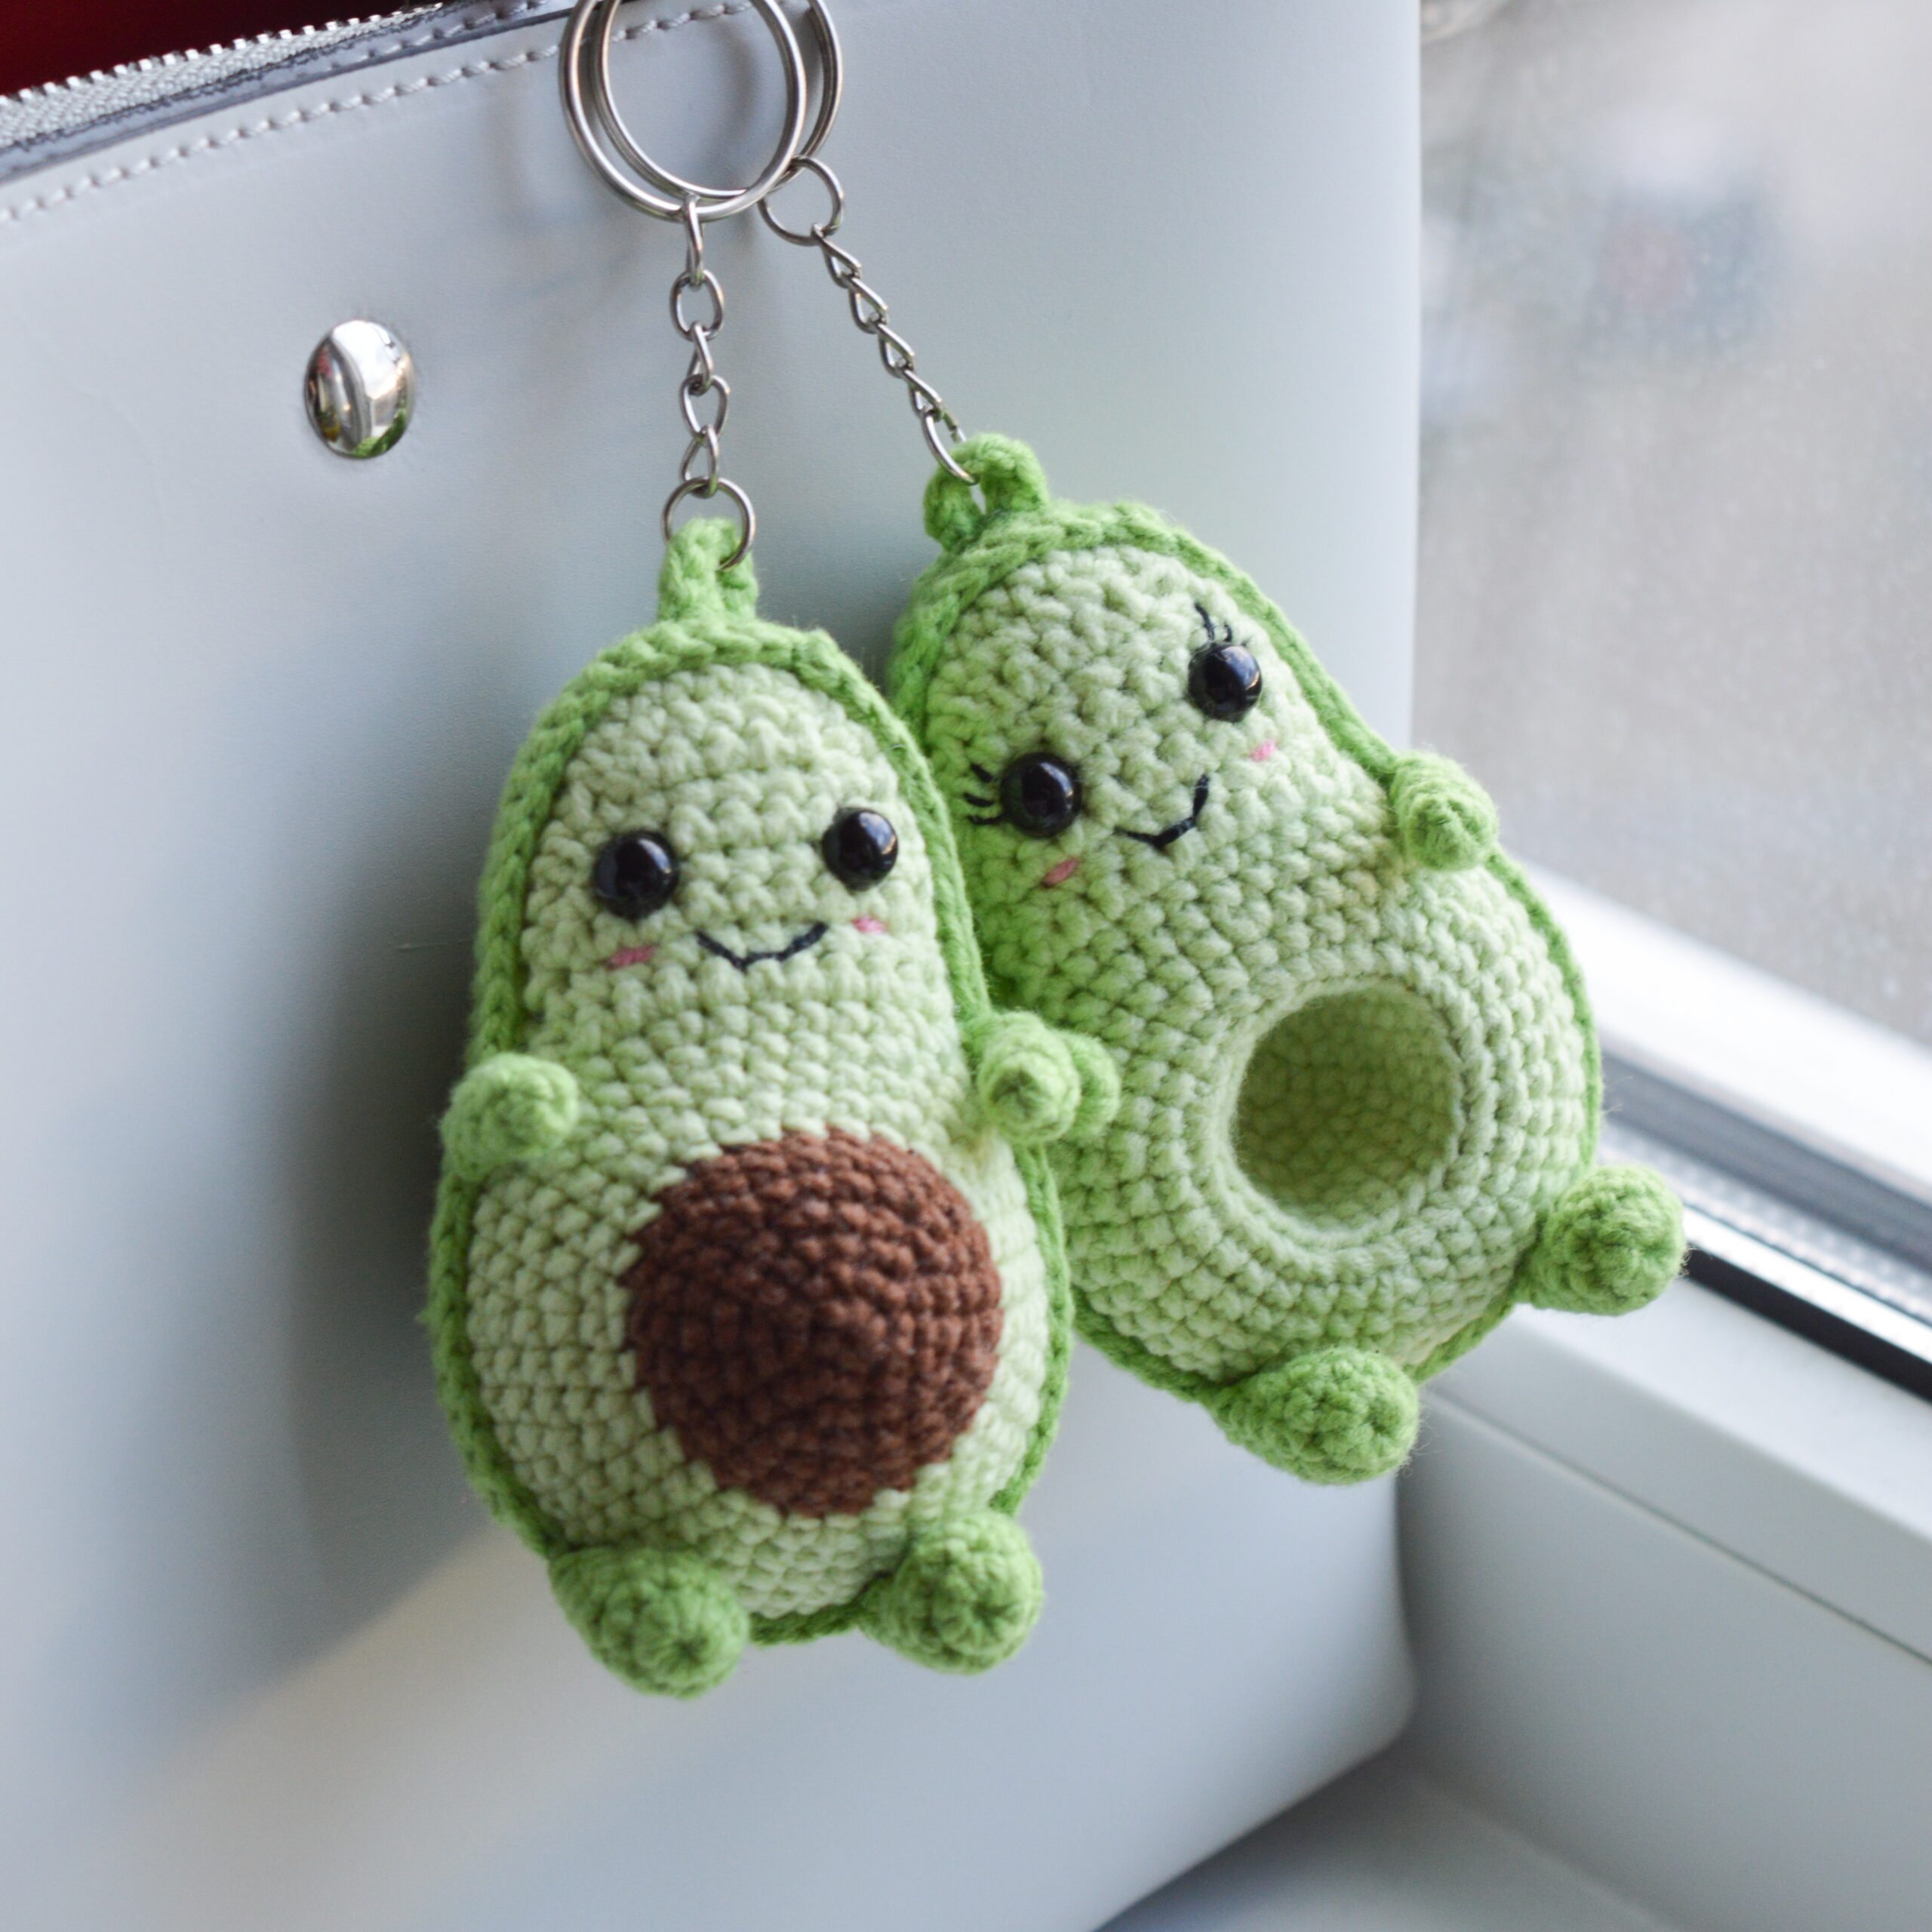 How to Crochet a Hot Dog Keychain or Ornament ~ Tutorial 